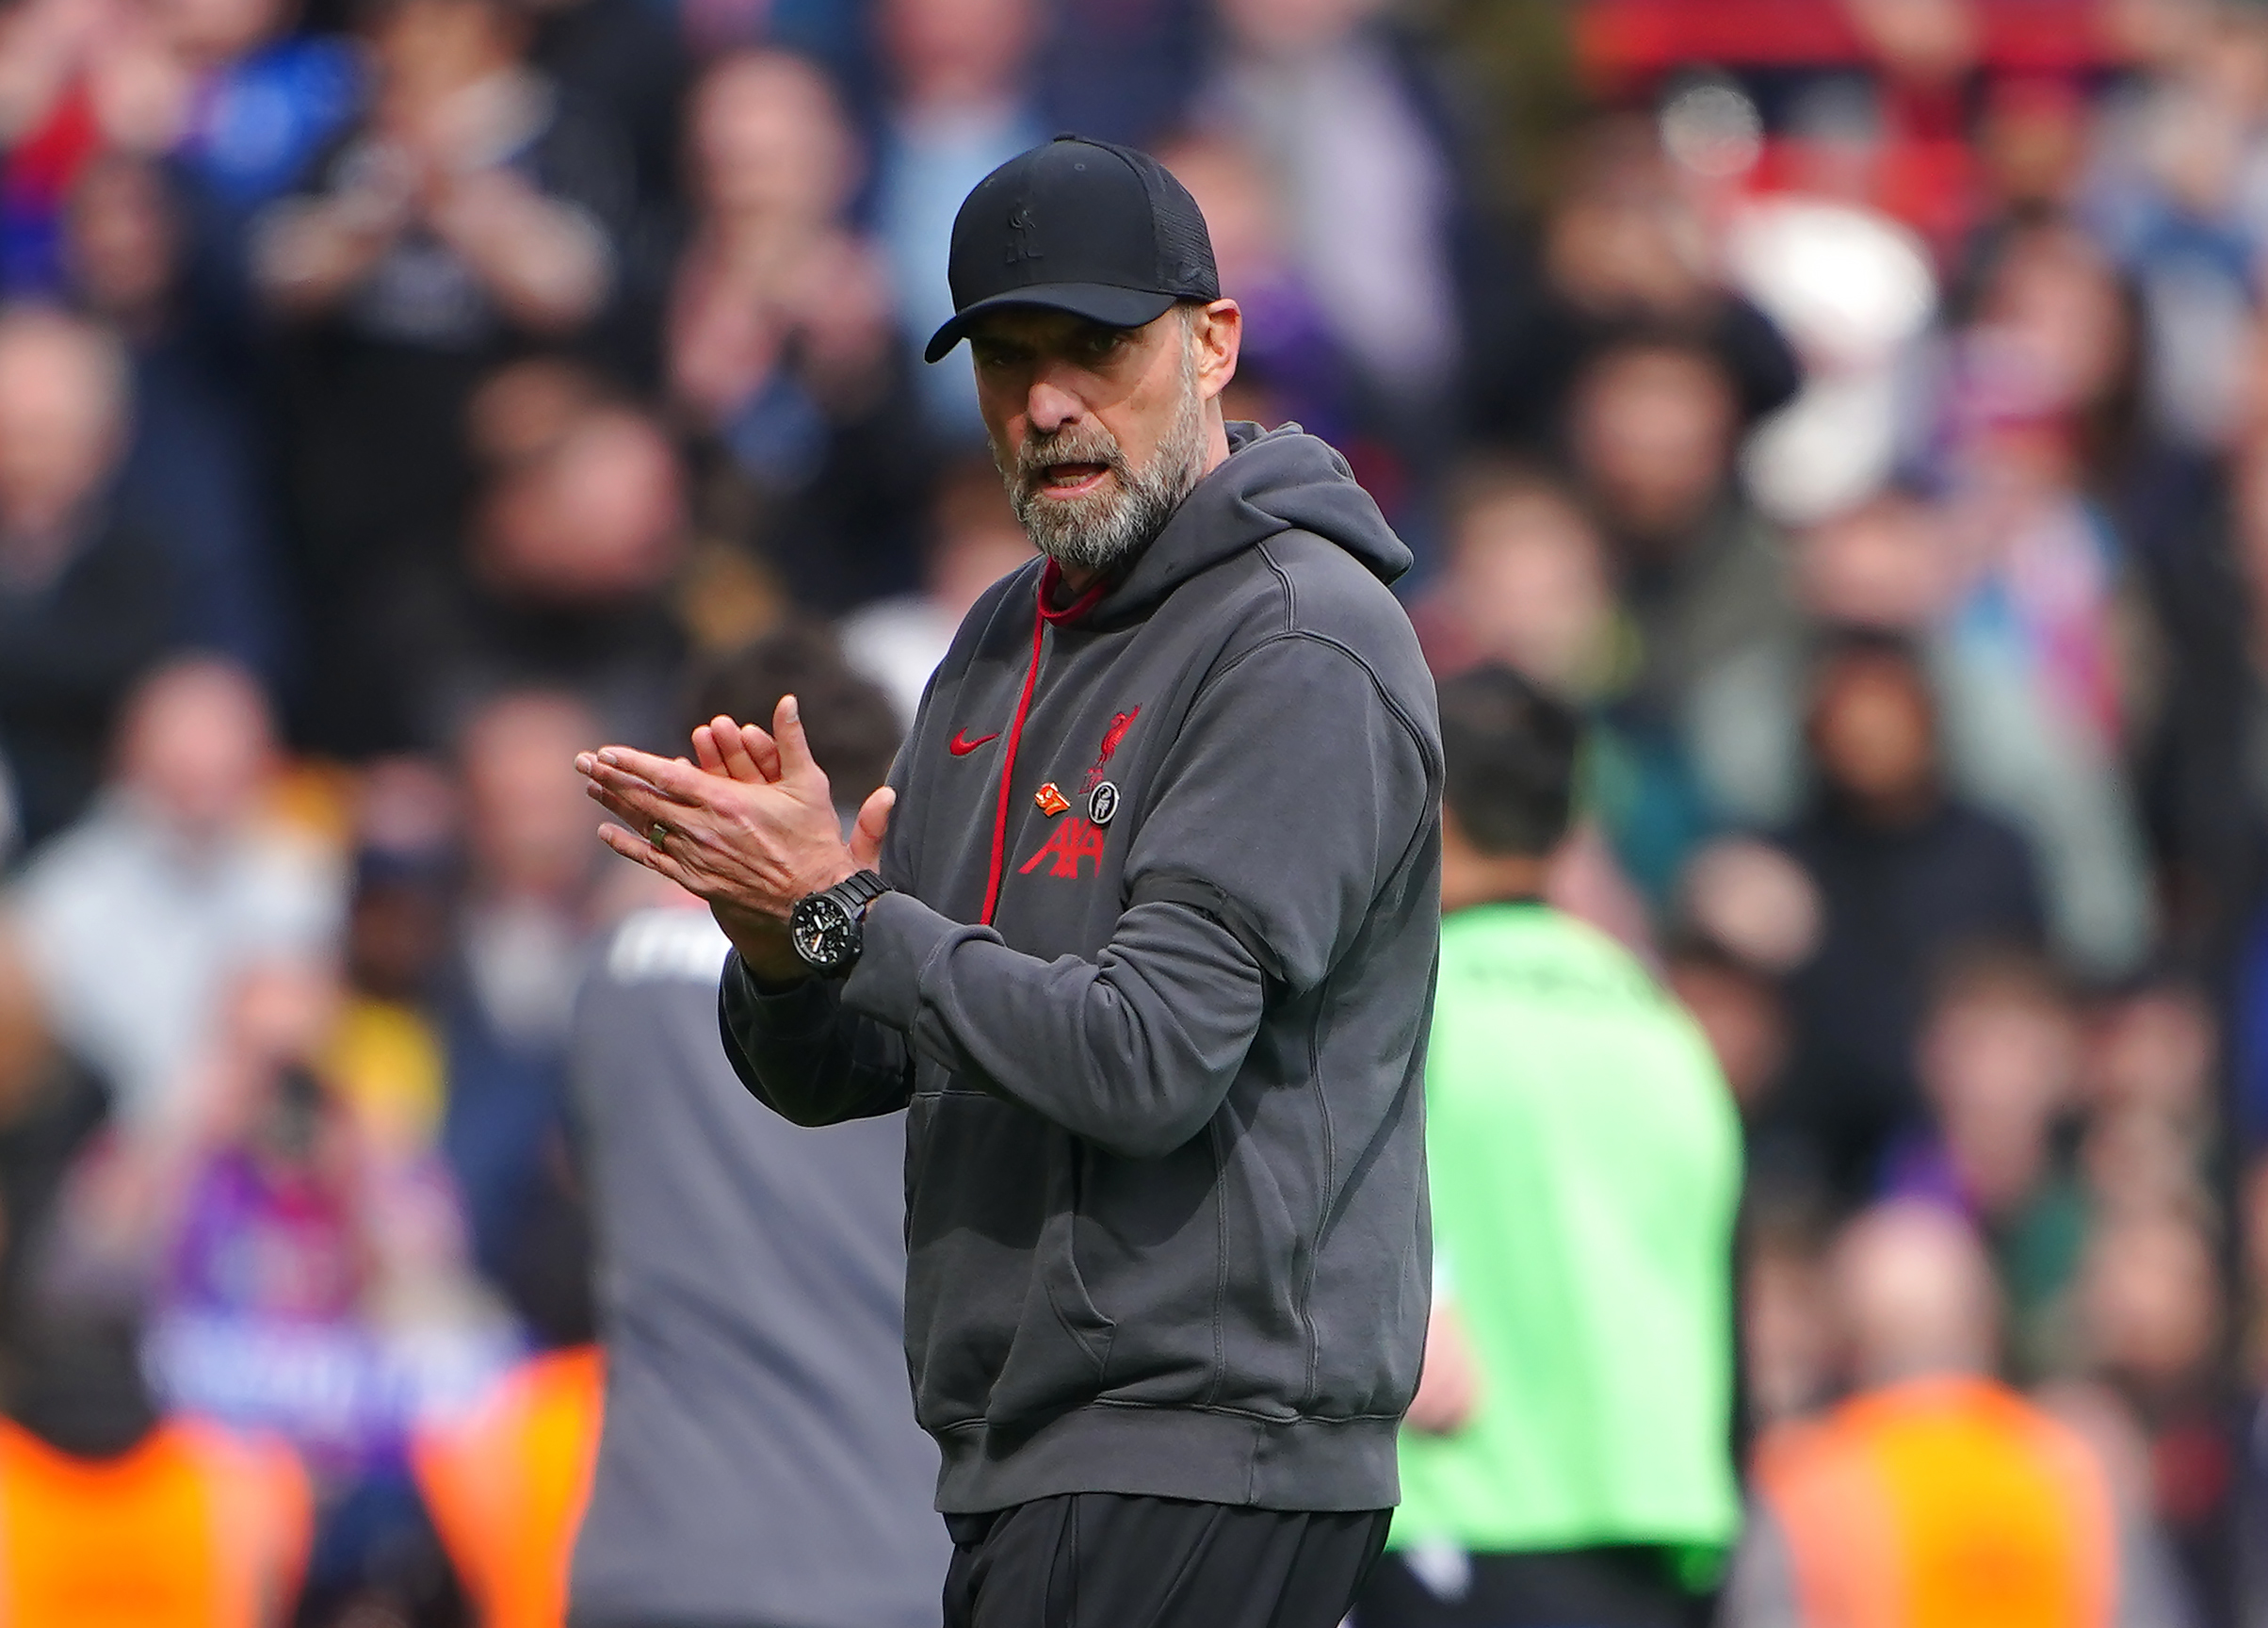 Liverpool and their manager Jurgen Klopp are looking to overturn a 3-0 first leg deficit away to Atalanta on Thursday night